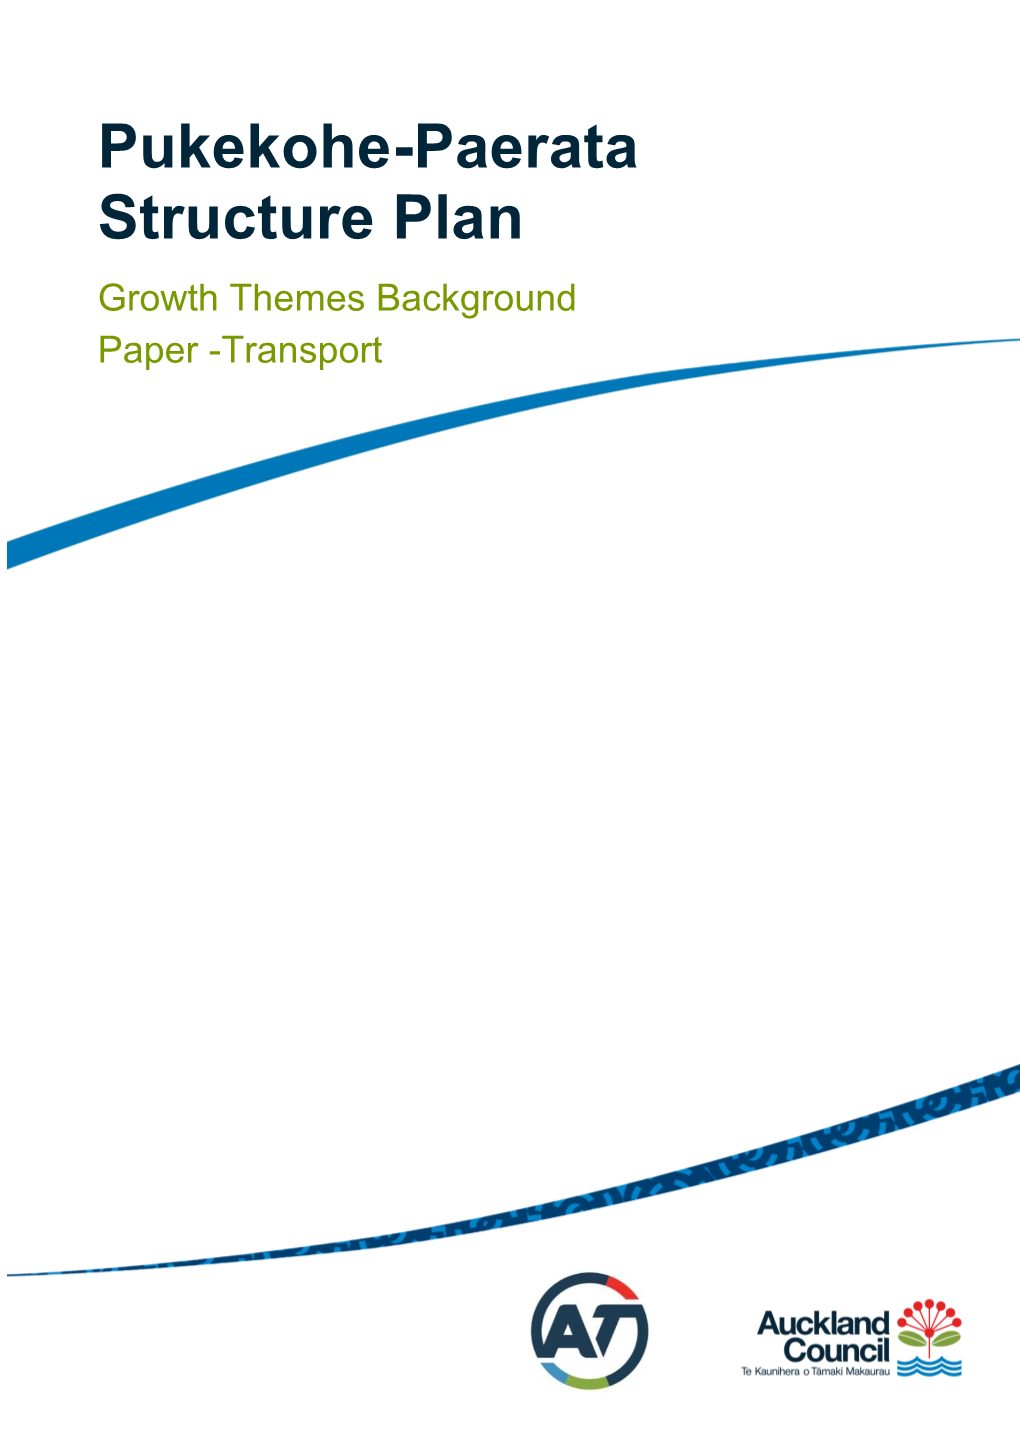 Pukekohe-Paerata Structure Plan Growth Themes Background Paper -Transport